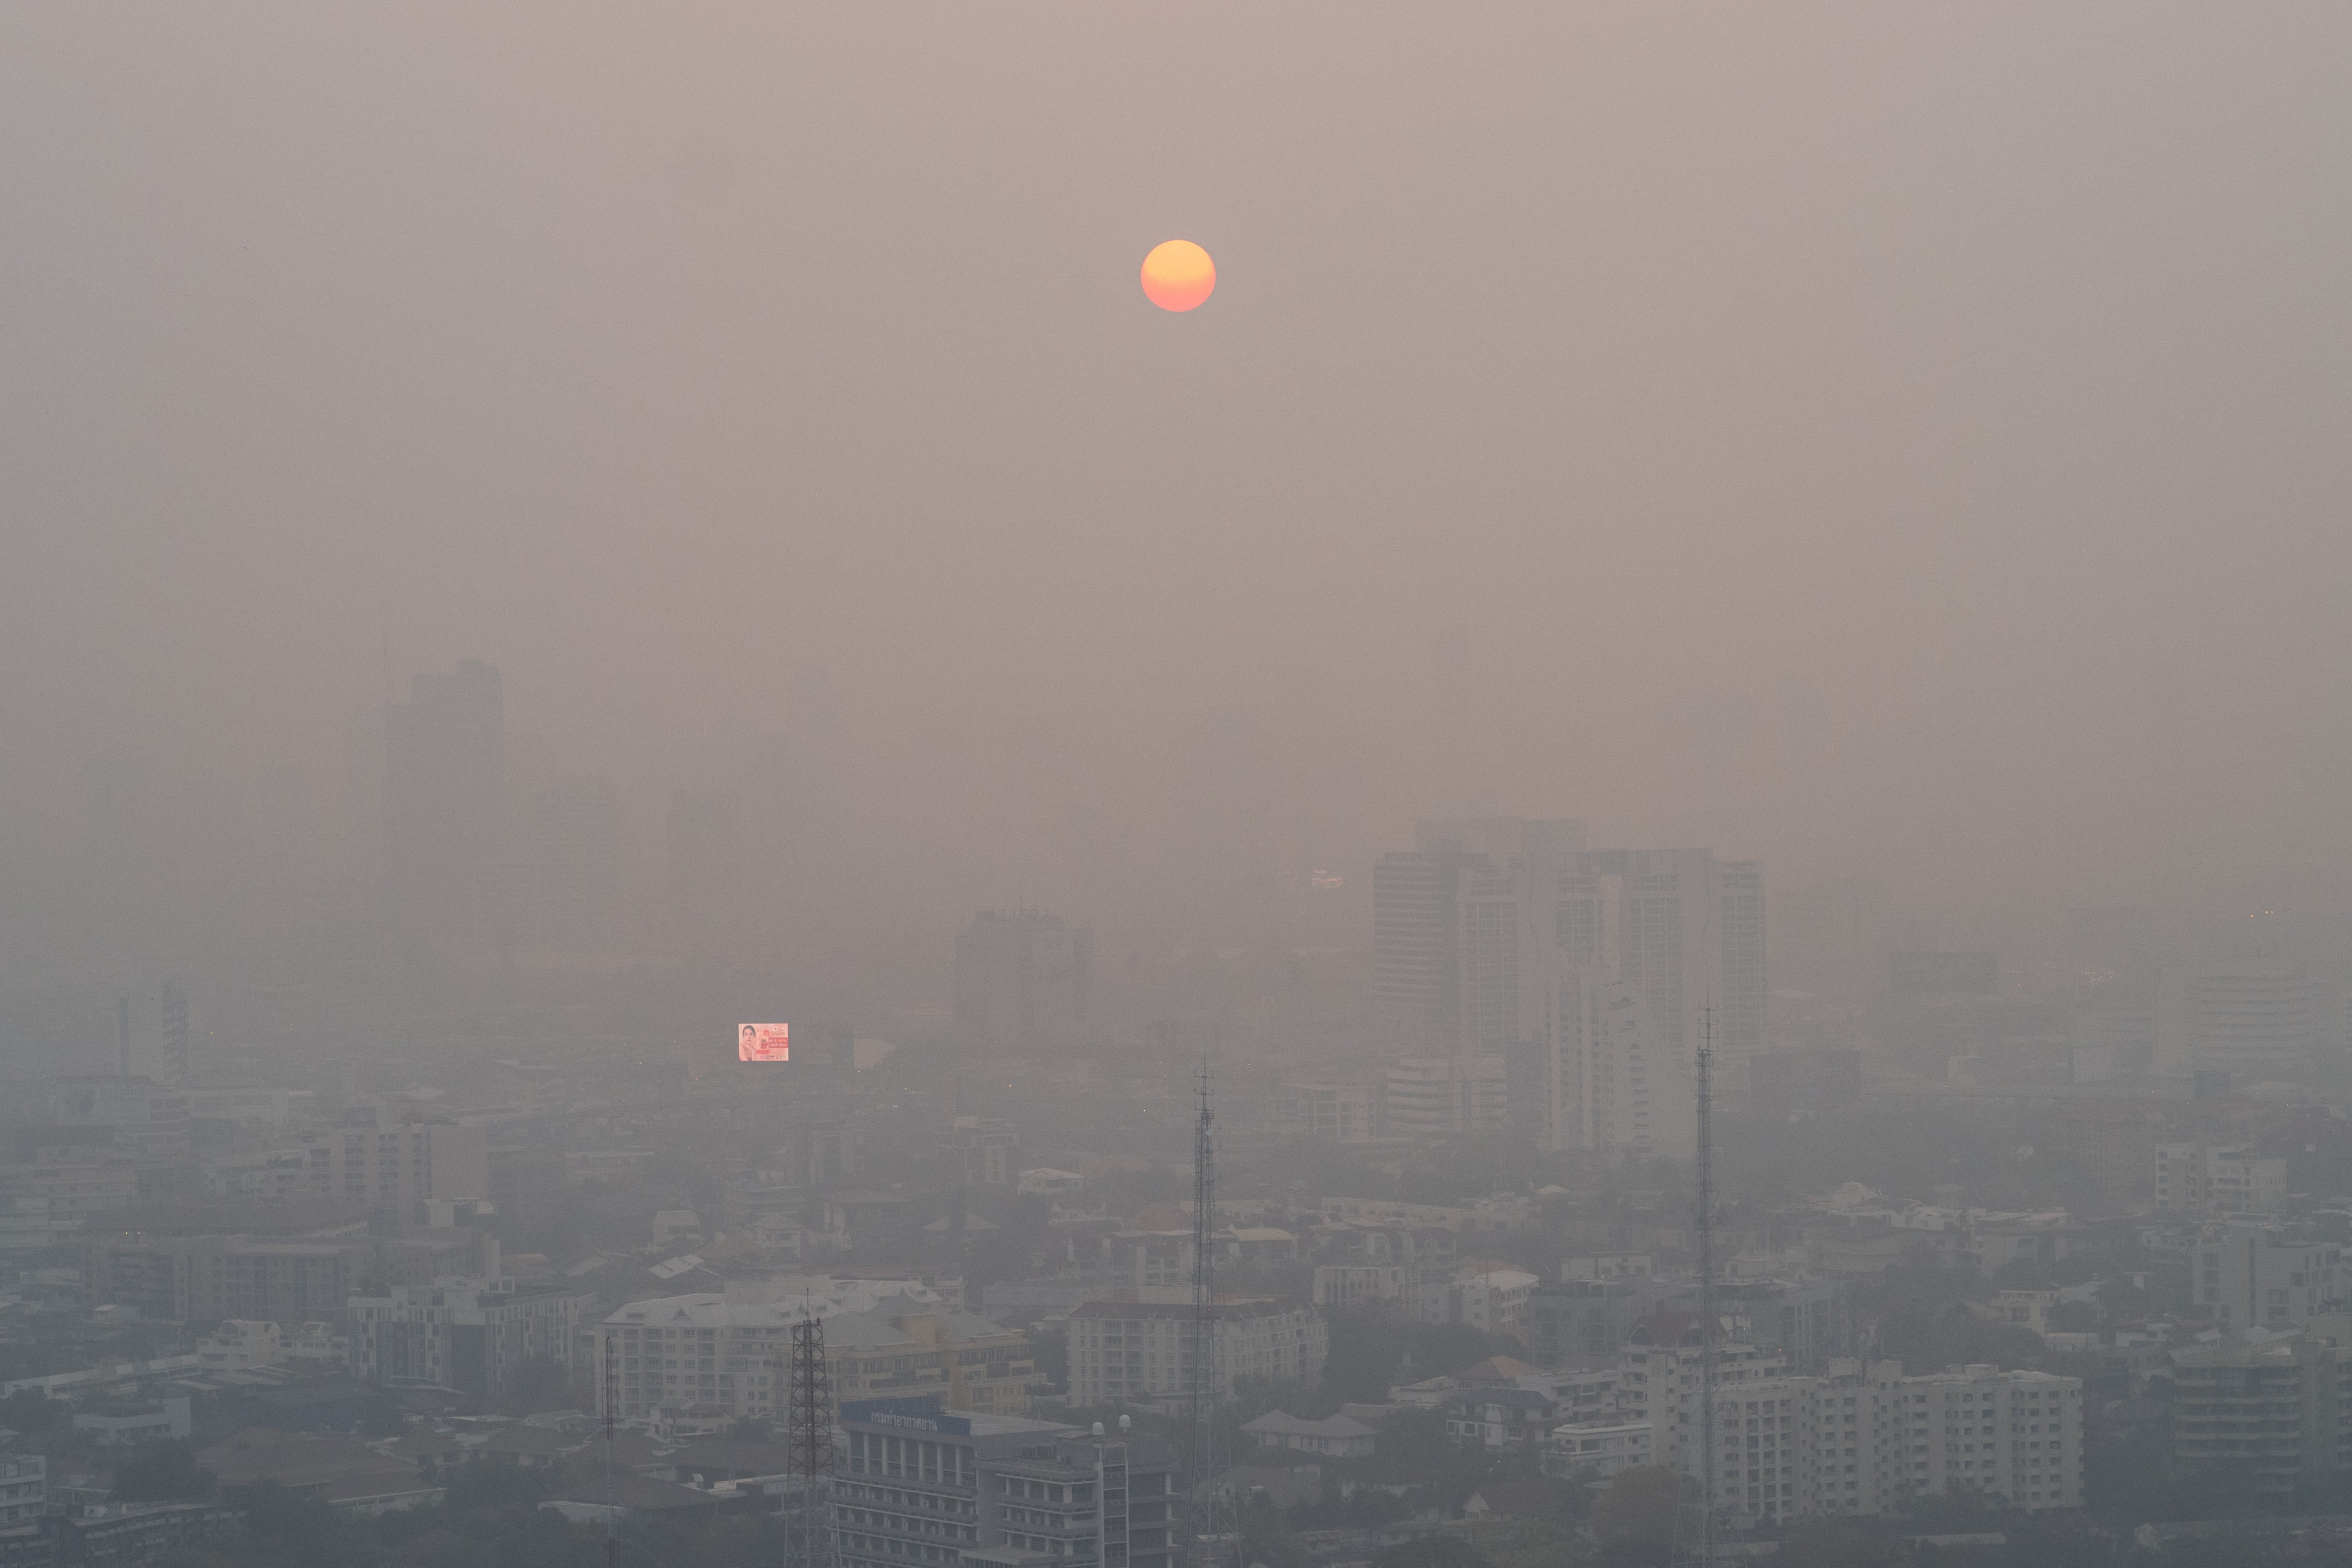 Thailand’s capital Bangkok seen shrouded in air pollution during sunrise on Tuesday. Photo: Reuters